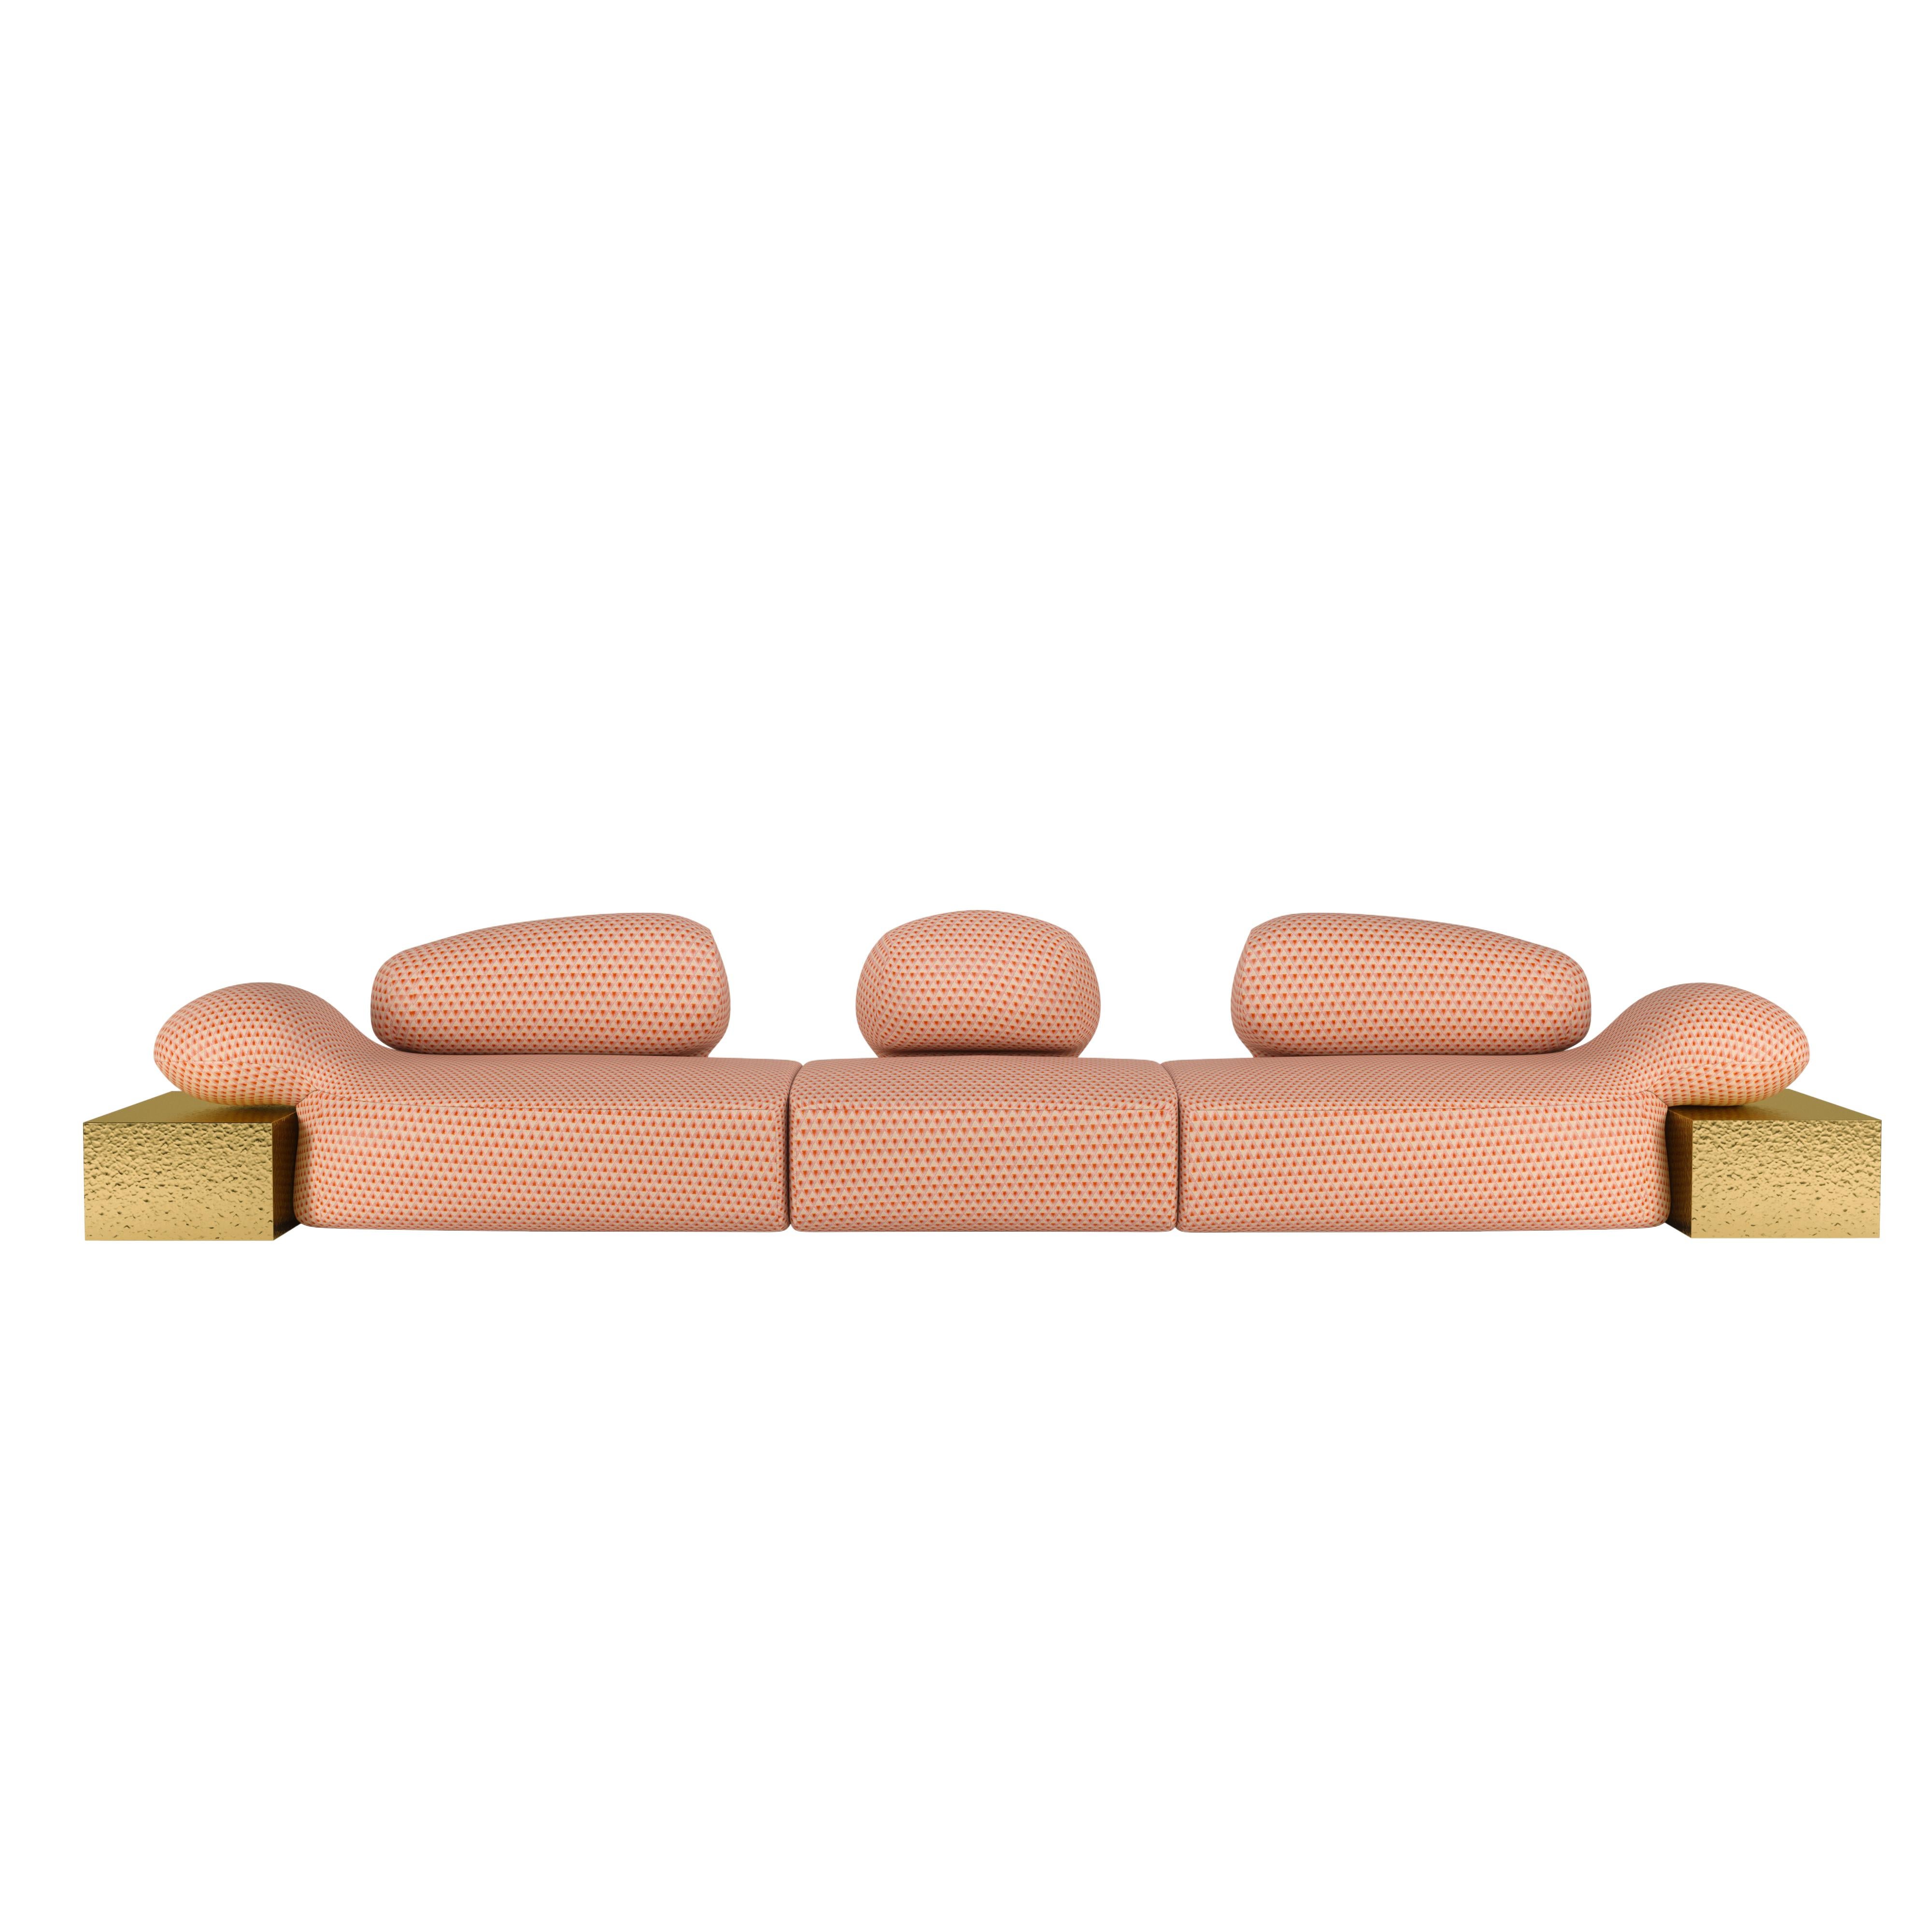 Against the minimalist design concept and characterized by a free use of color and shapes, the modernism movement sparks the impulse for Malabar designers to conceive this future classic sofa.

Within this artistic-flavored space, the Viv Id II sofa